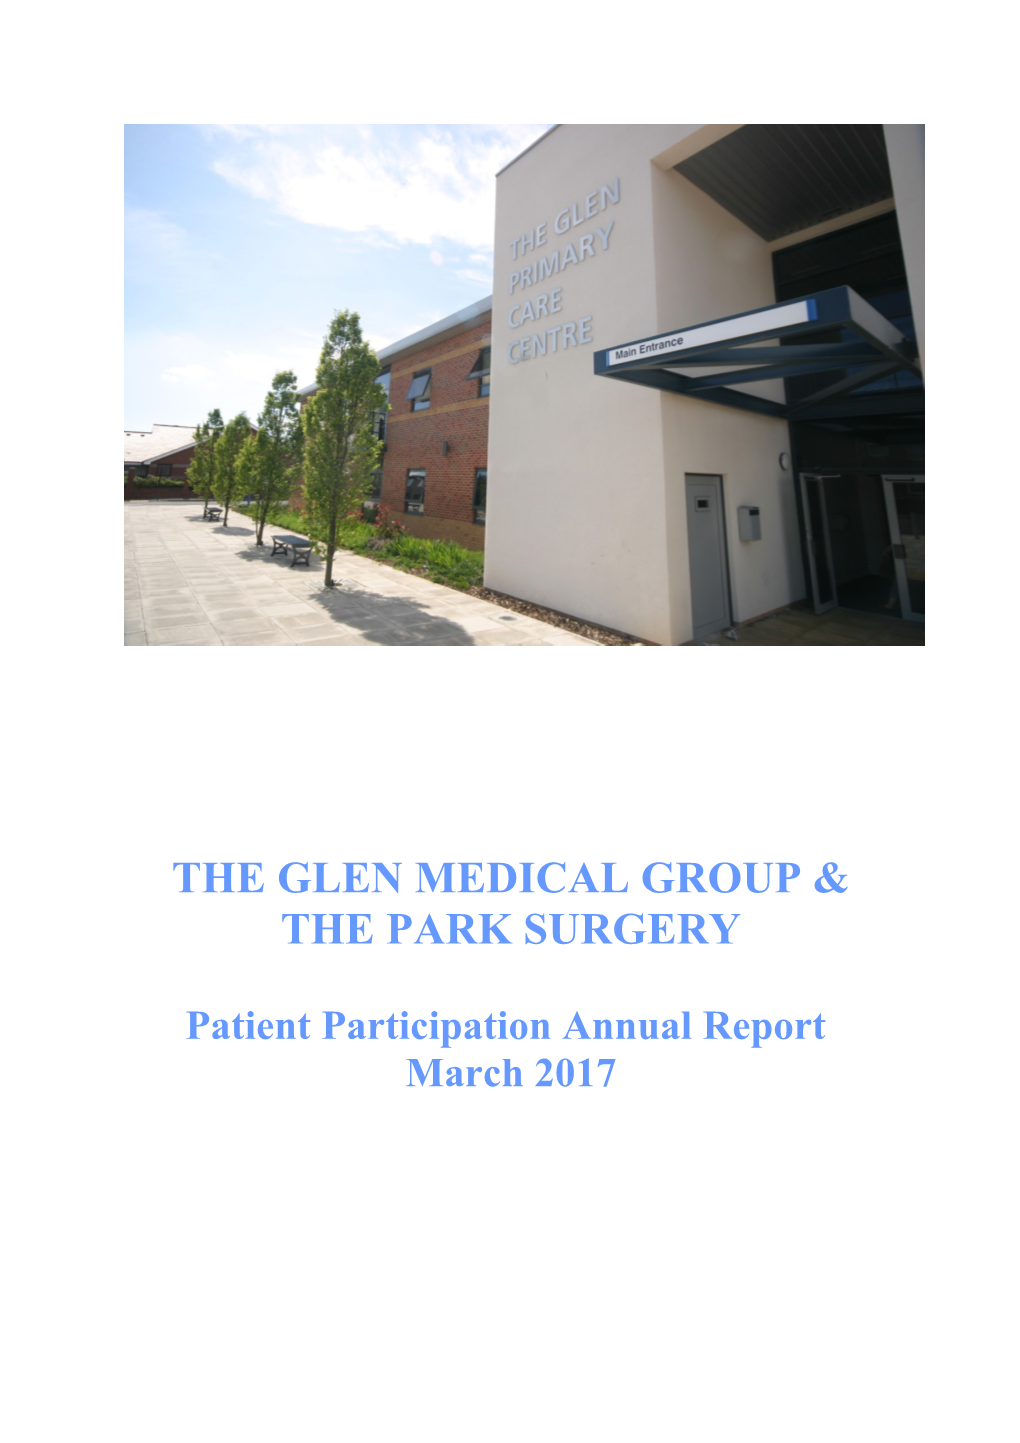 The Glen Medical Group & the Park Surgery